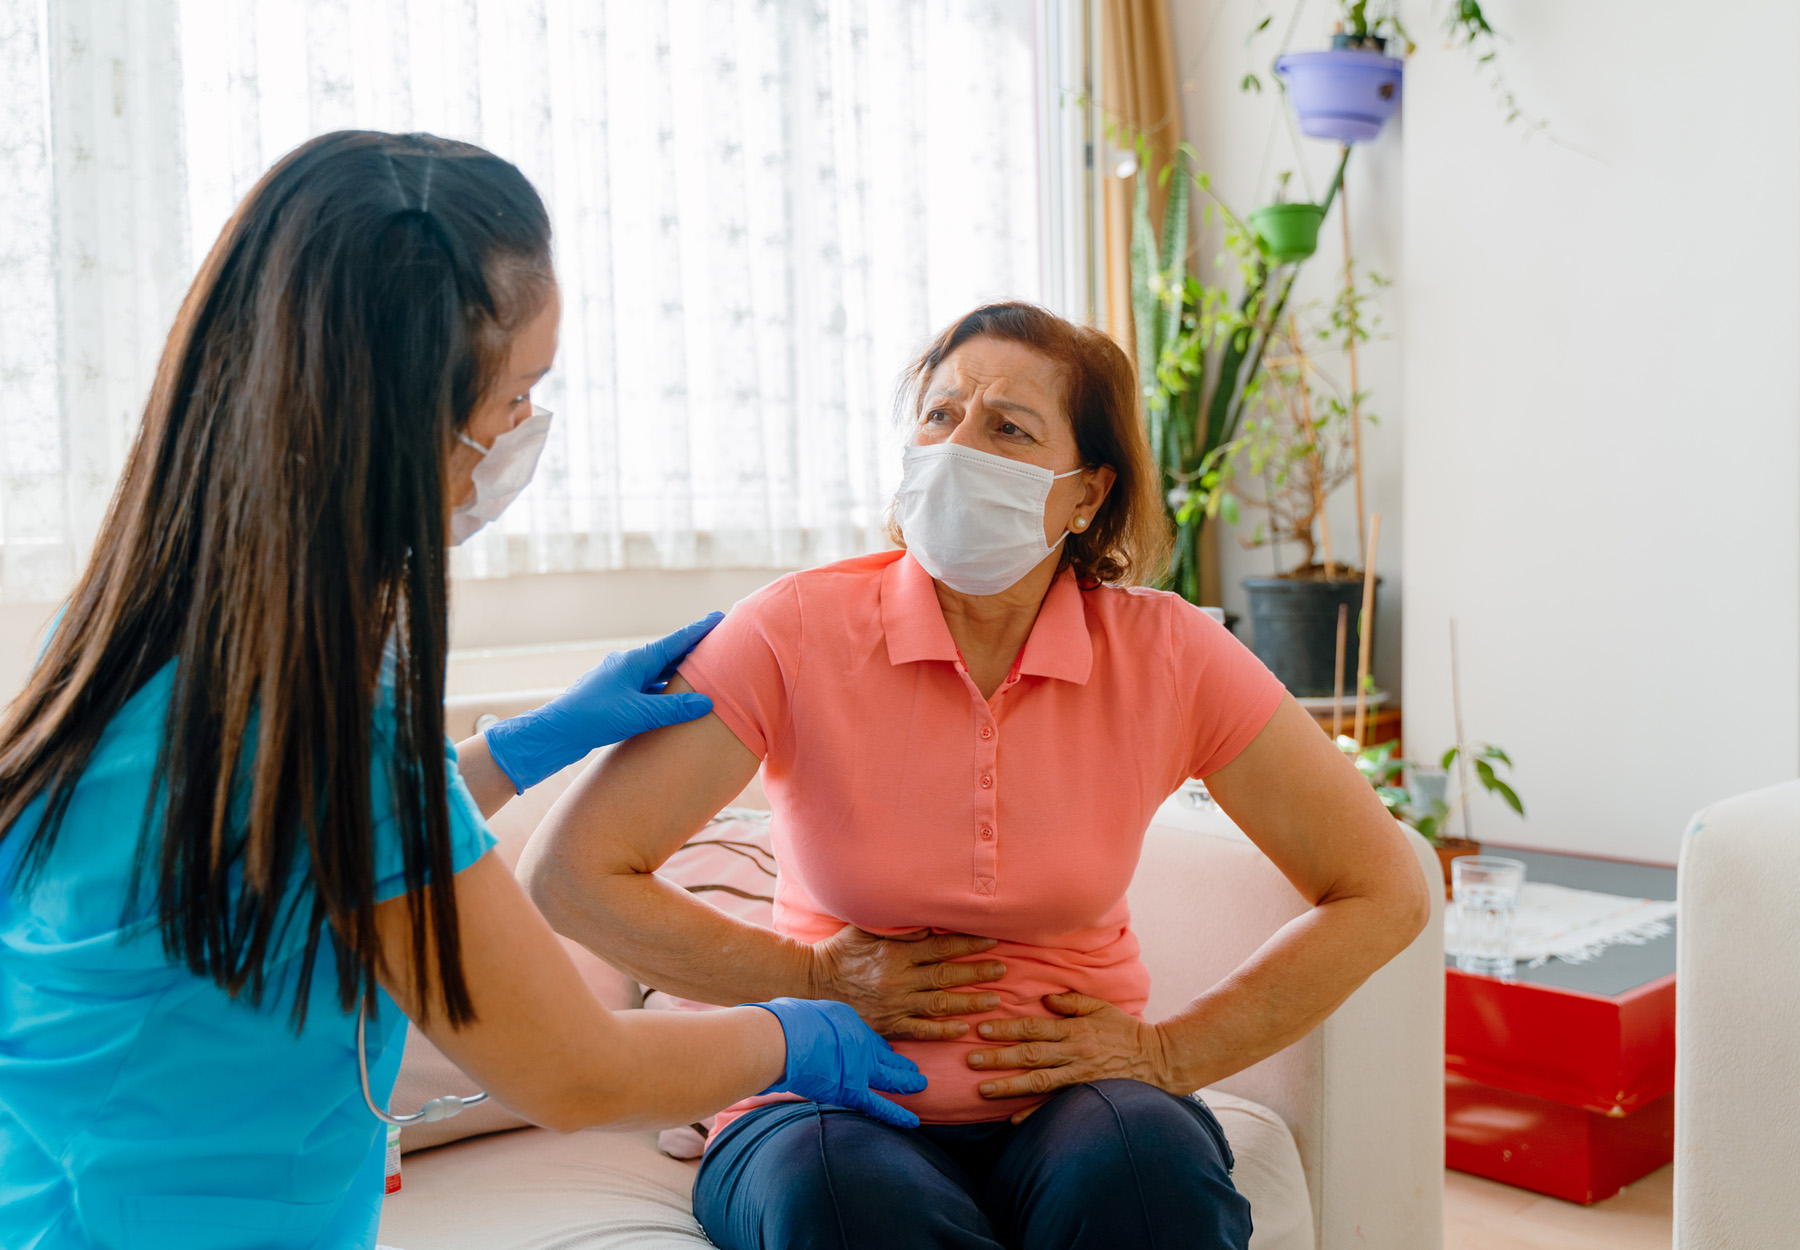 An elderly female patient wearing a mask holds her stomach in pain while a masked healthcare worker helps her, stock image